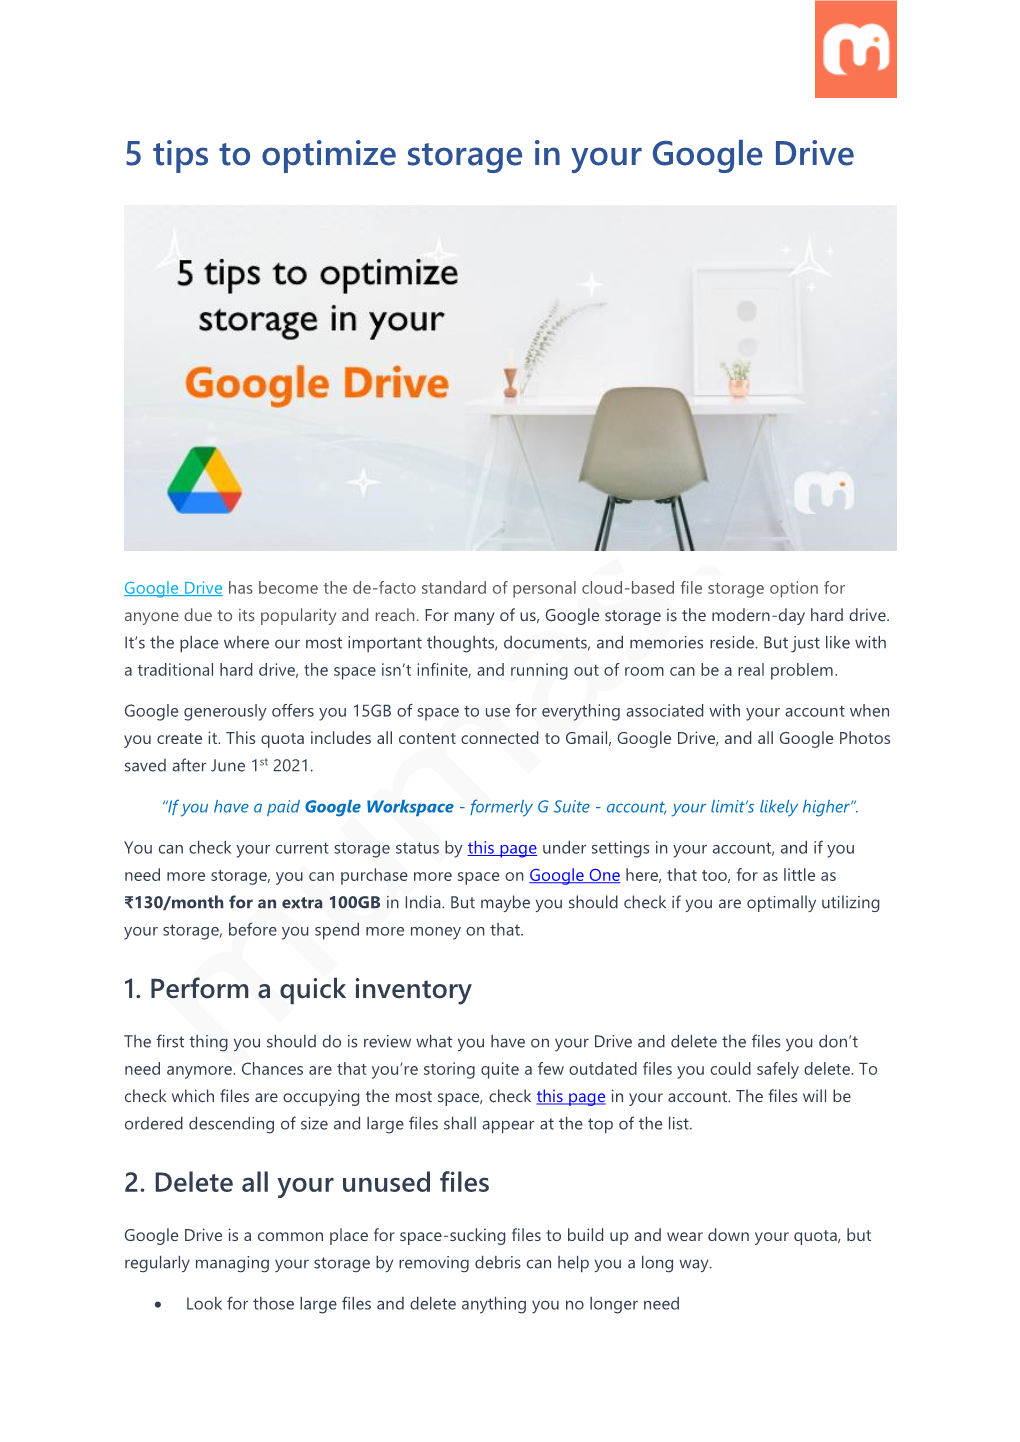 5 Tips to Optimize Storage in Your Google Drive